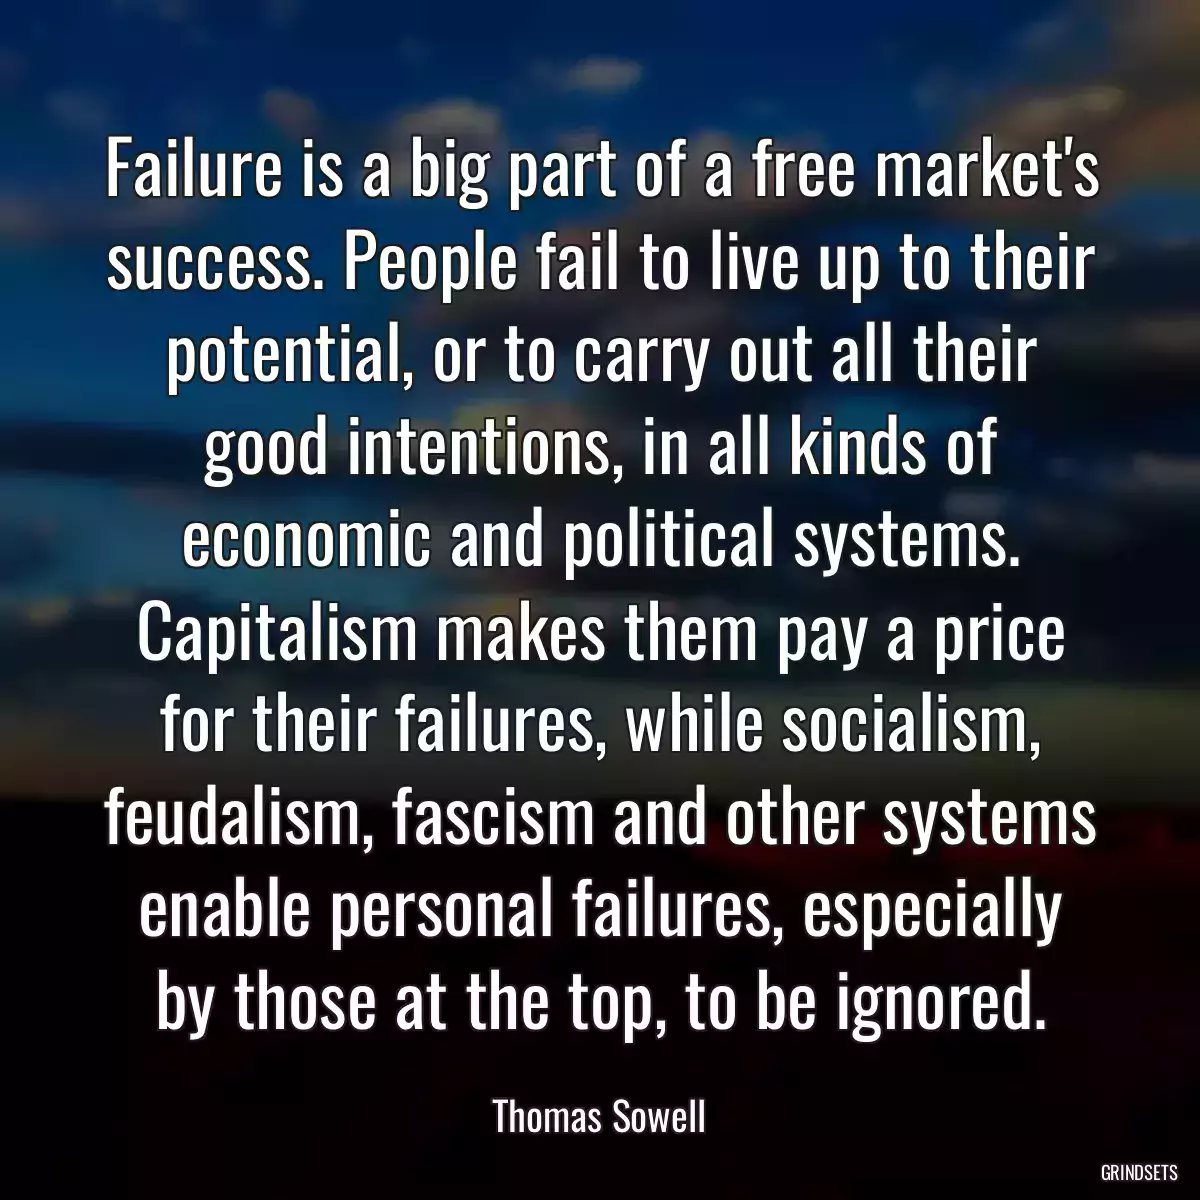 Failure is a big part of a free market\'s success. People fail to live up to their potential, or to carry out all their good intentions, in all kinds of economic and political systems. Capitalism makes them pay a price for their failures, while socialism, feudalism, fascism and other systems enable personal failures, especially by those at the top, to be ignored.